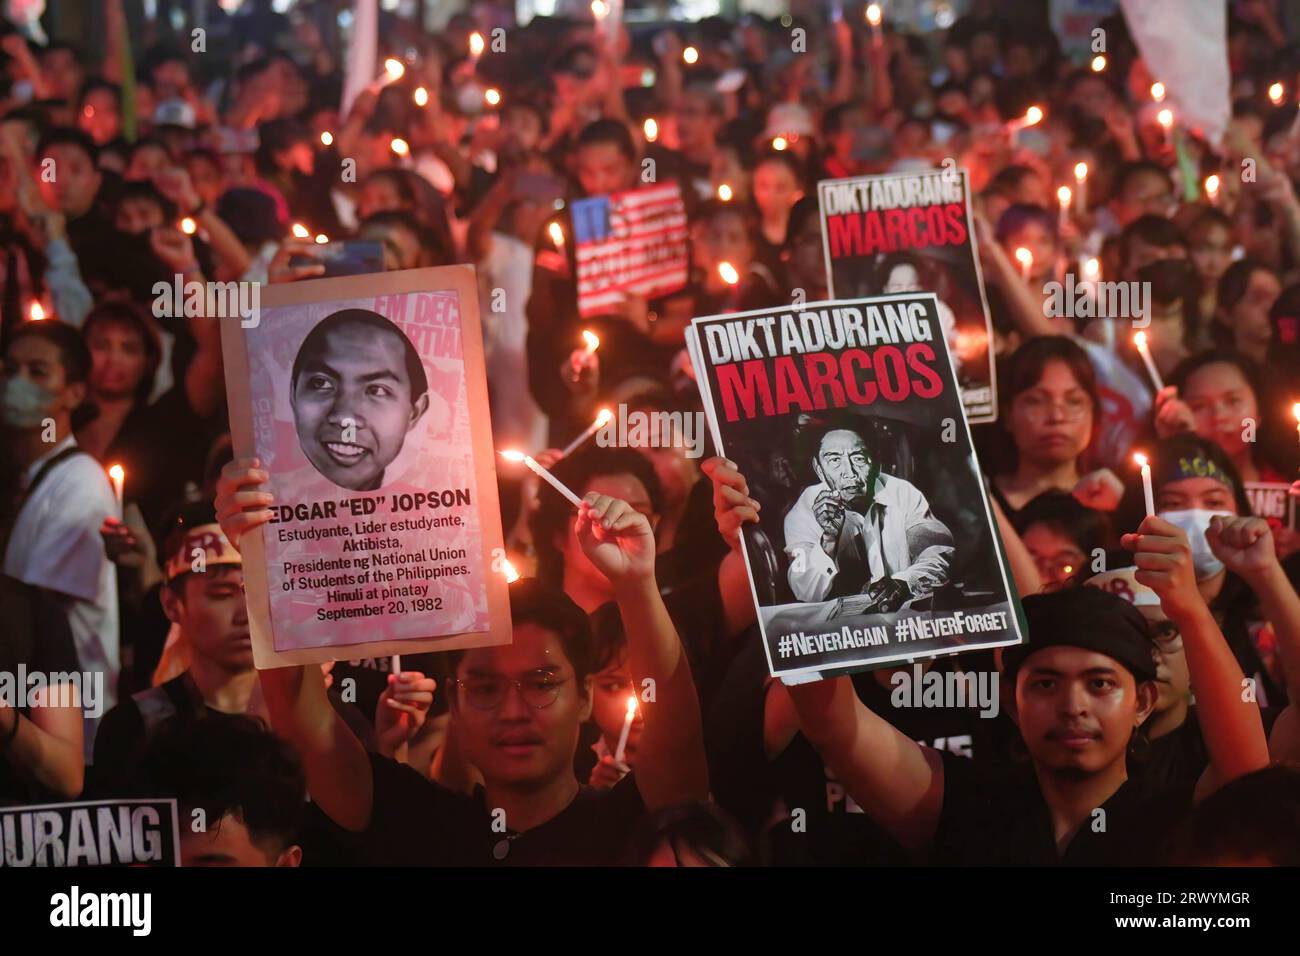 Protesters hold a photo of martial law victim and Marcos Sr. during the demonstration. Extremists marched in Manila to mark the 51st anniversary of the declaration of Martial Law in the Philippines by the late dictator Ferdinand Emmanuel Edralin Marcos Sr. The Martial Law marked as tumultuous phase in Philippine history. Former President Marcos placed the entire Philippines under Martial Law that lasted from September 21, 1972 to January 17, 1981. During that time, Marcos cracked down on dissent and imprisoned thousands of his political critics. The dictator's family, with the power of Ferdina Stock Photo